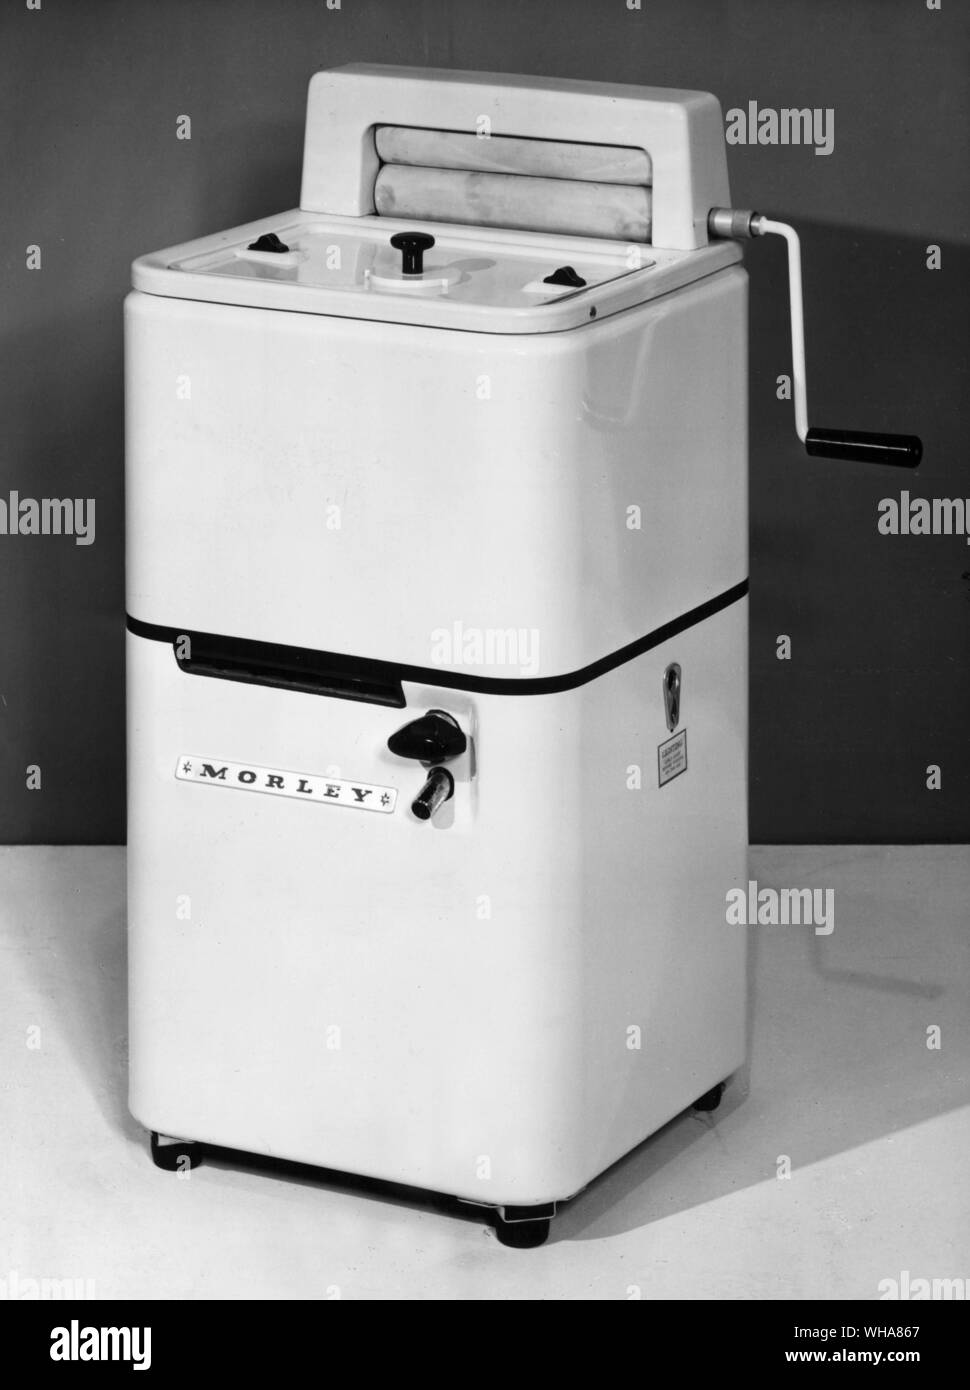 Washing machine and built in mangle. Morley 55 plus. Gas wash boiler Stock Photo